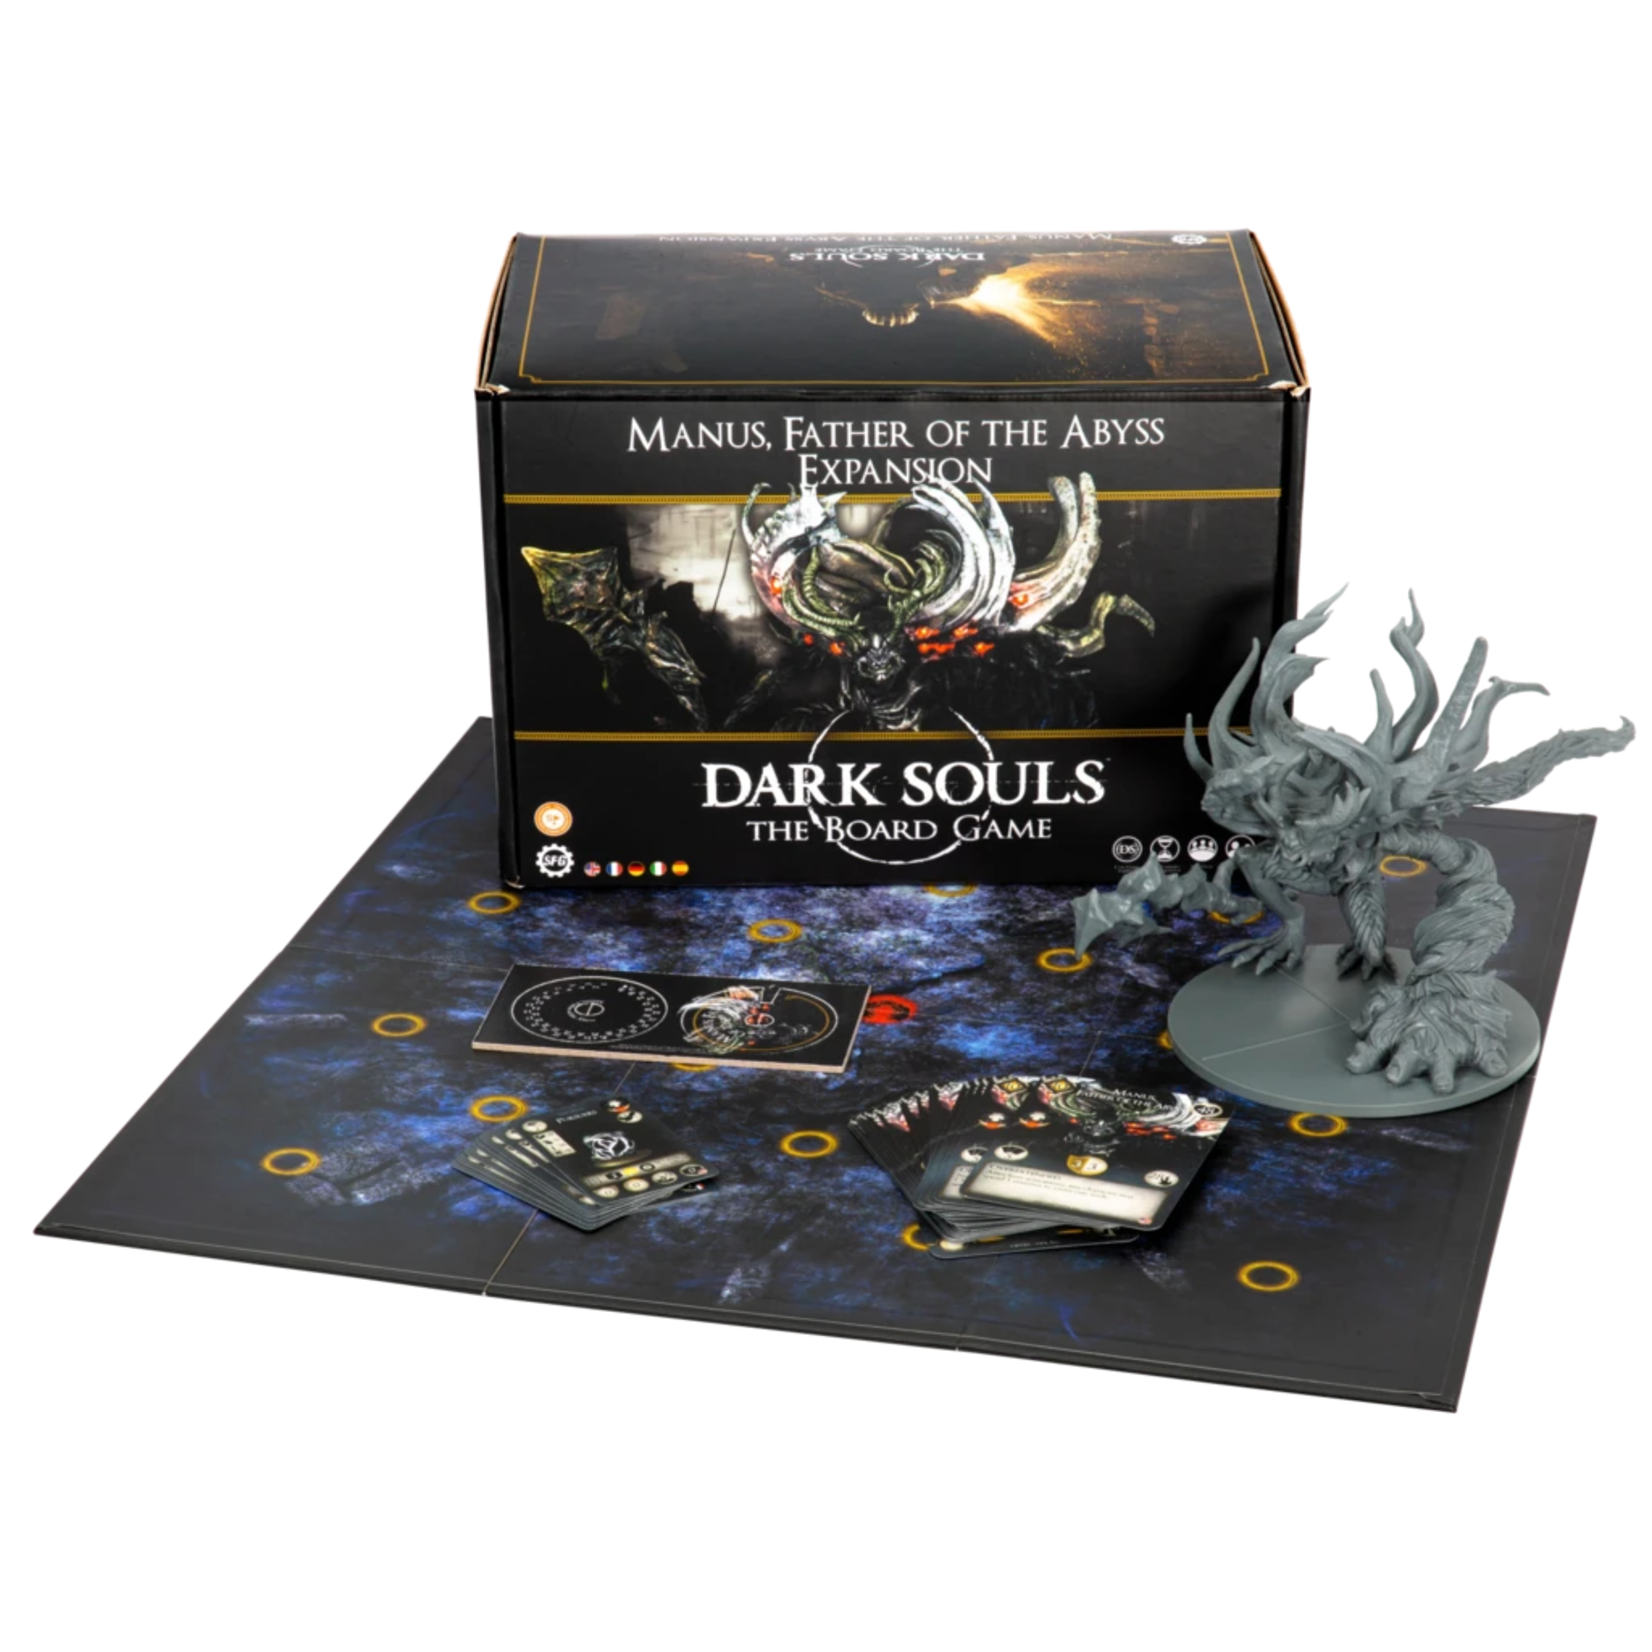 Steamforged Games Dark Souls: Manus, Father of the Abyss Expansion